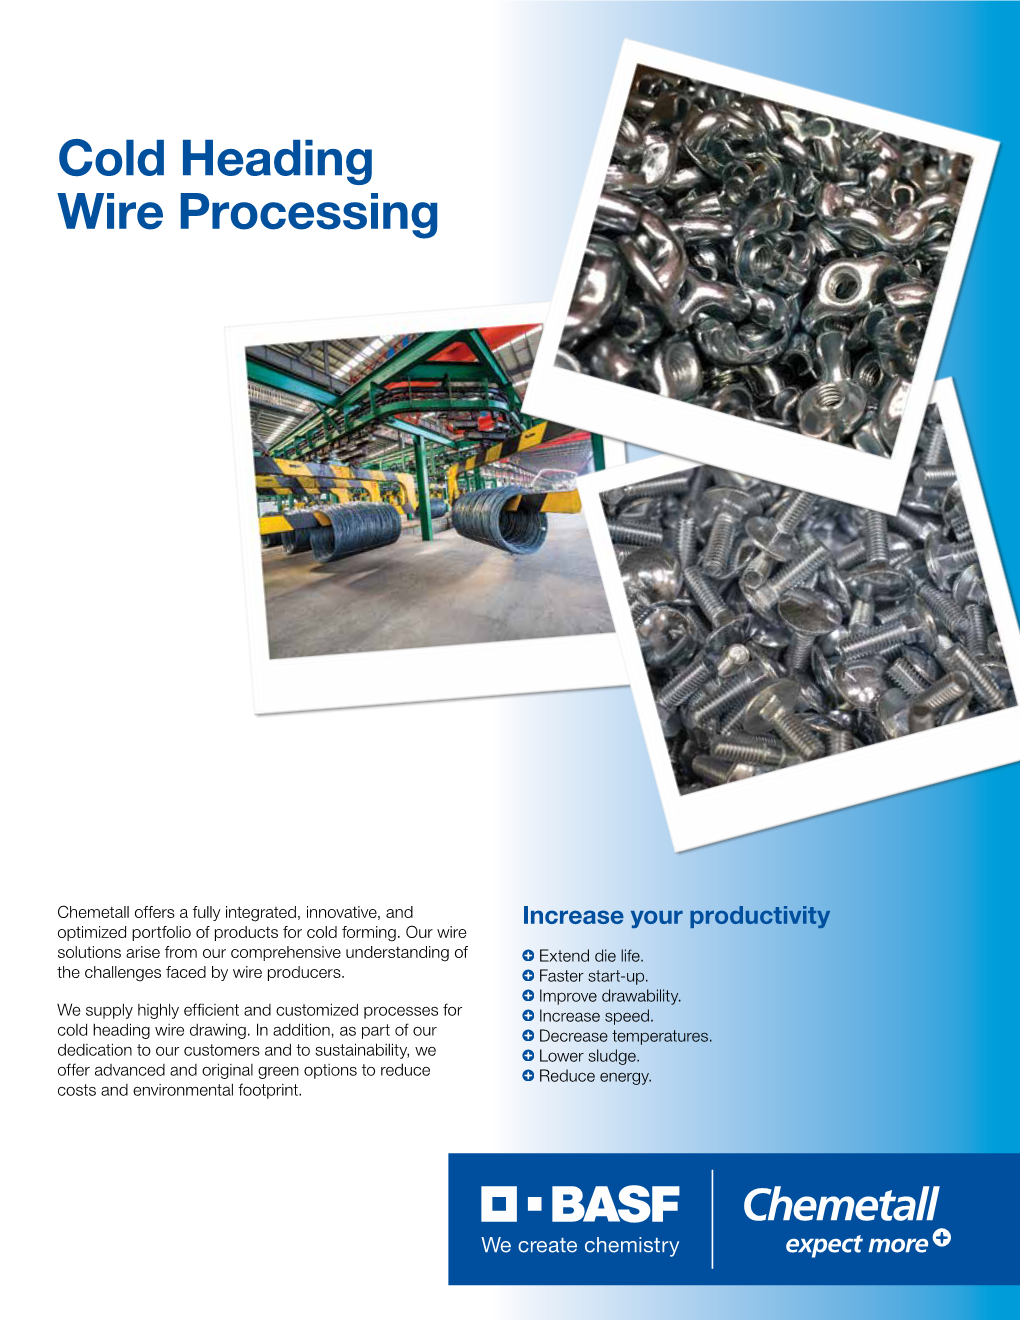 Cold Heading Wire Processing